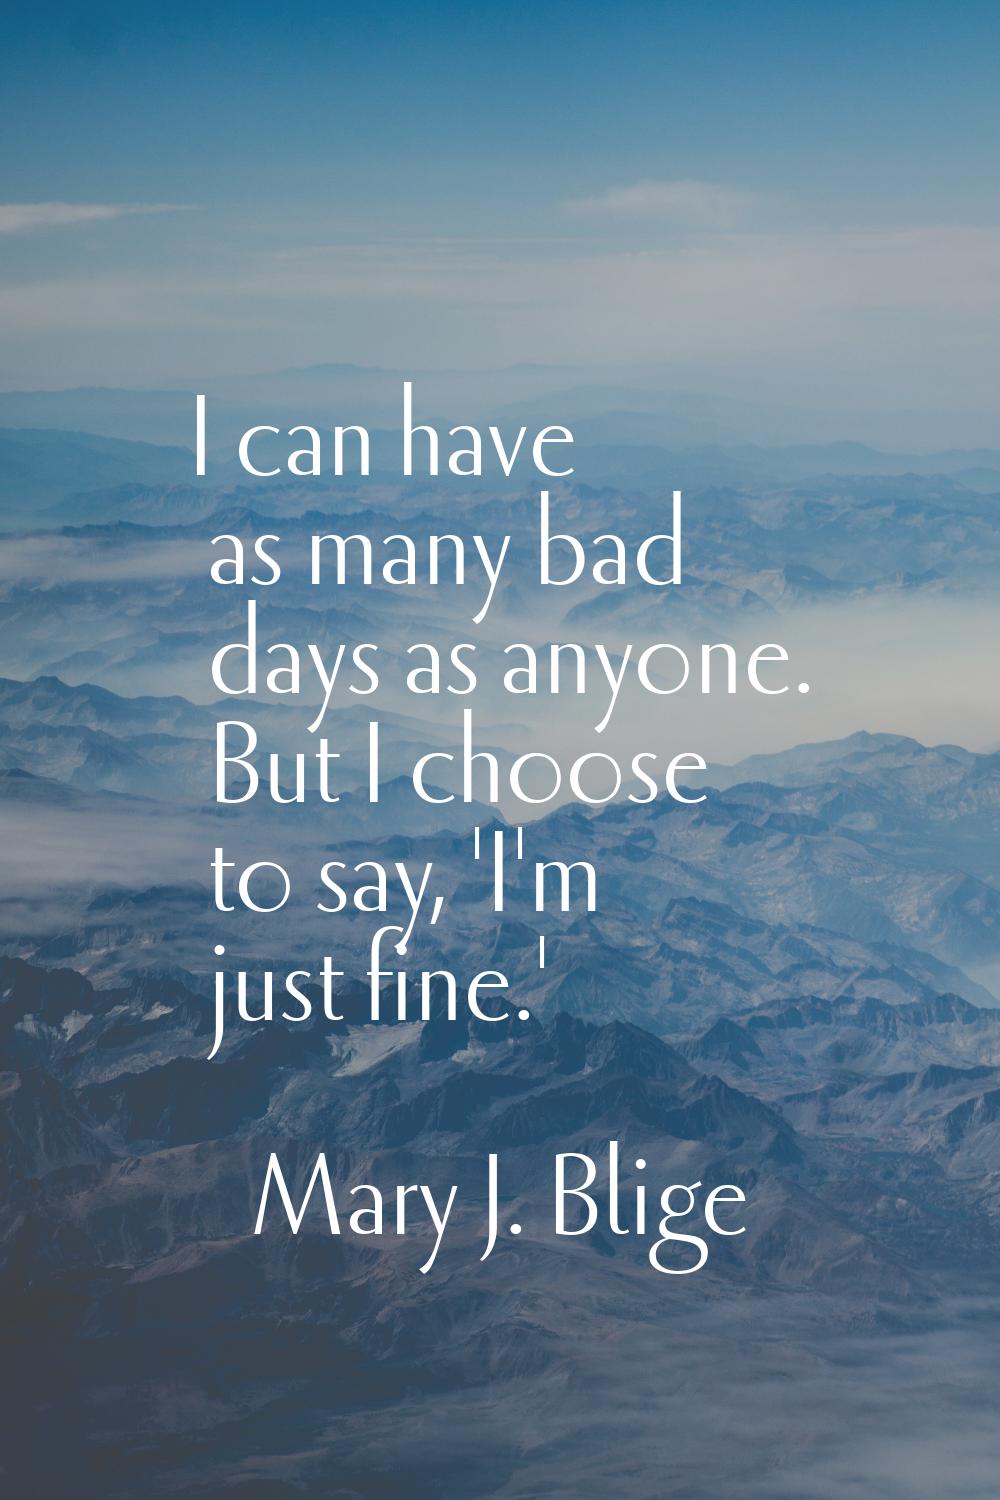 I can have as many bad days as anyone. But I choose to say, 'I'm just fine.'